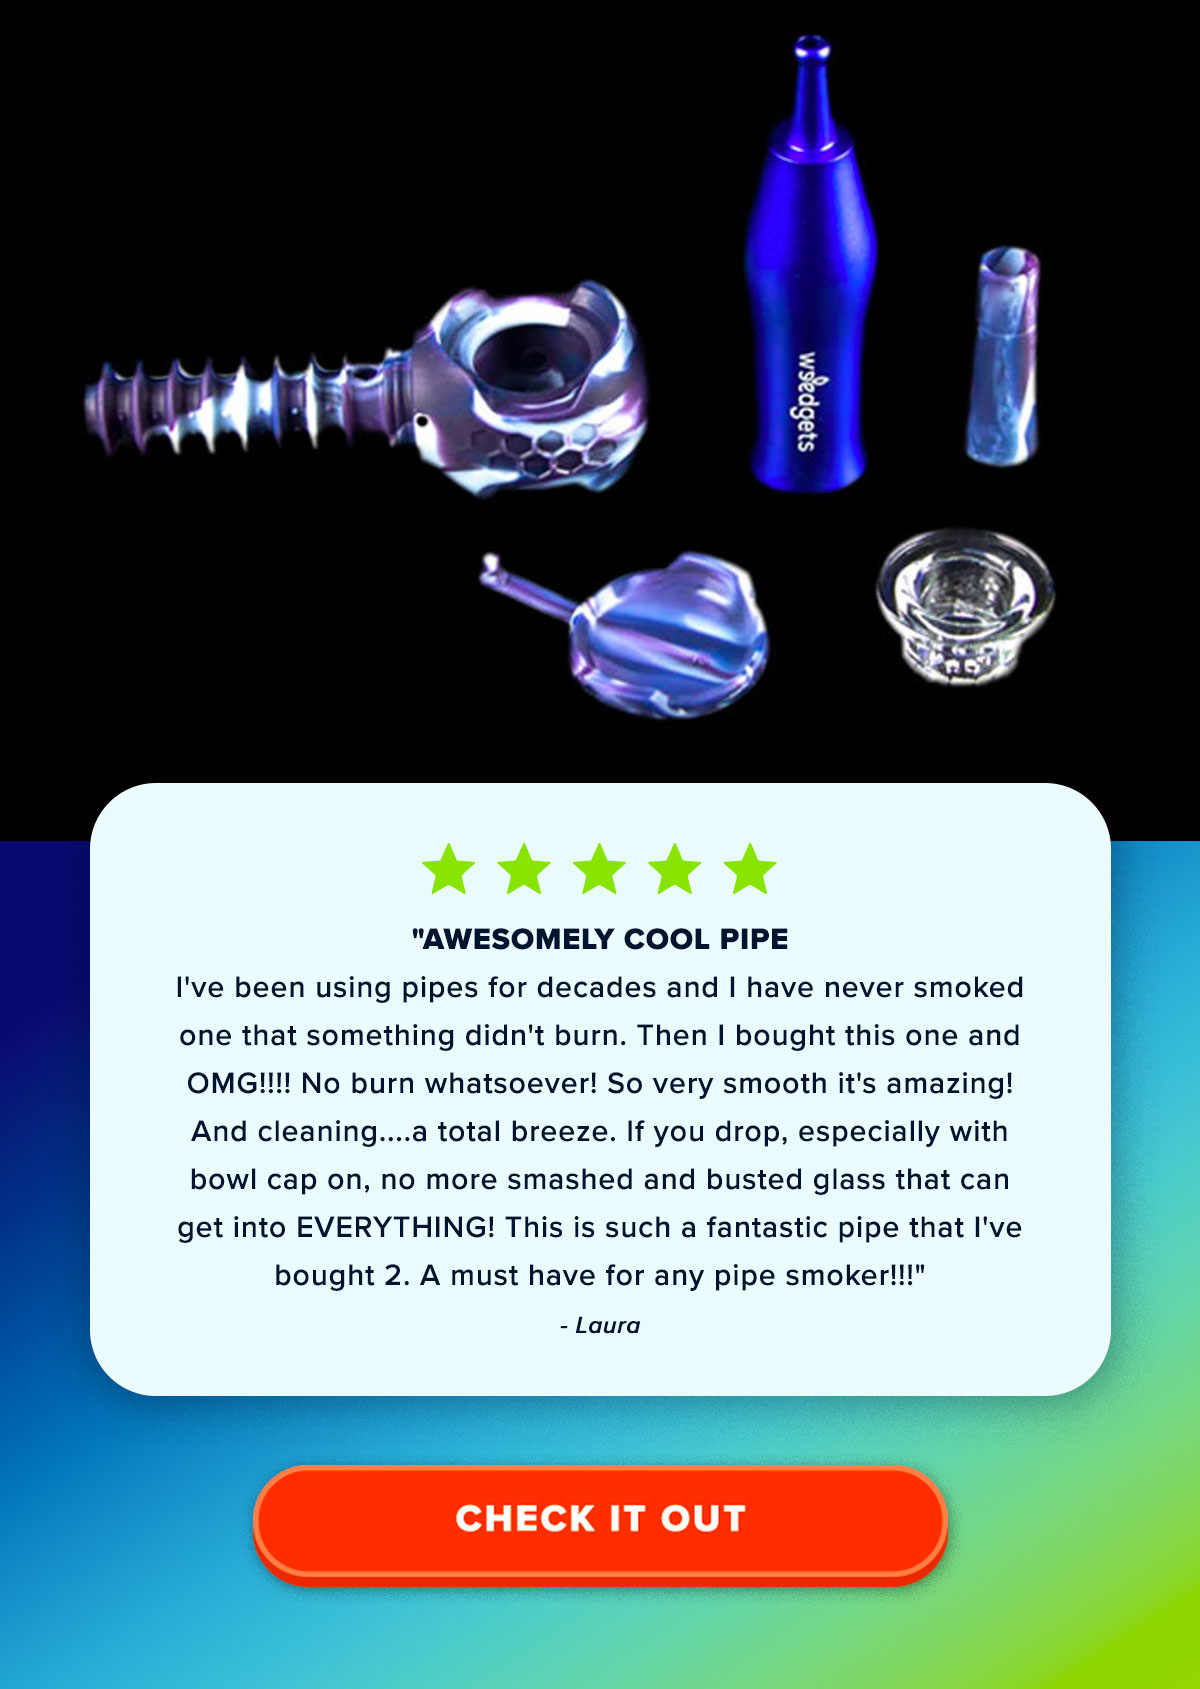 20% Off the Weedgets Maze-X Hand Pipe - Limited time only!